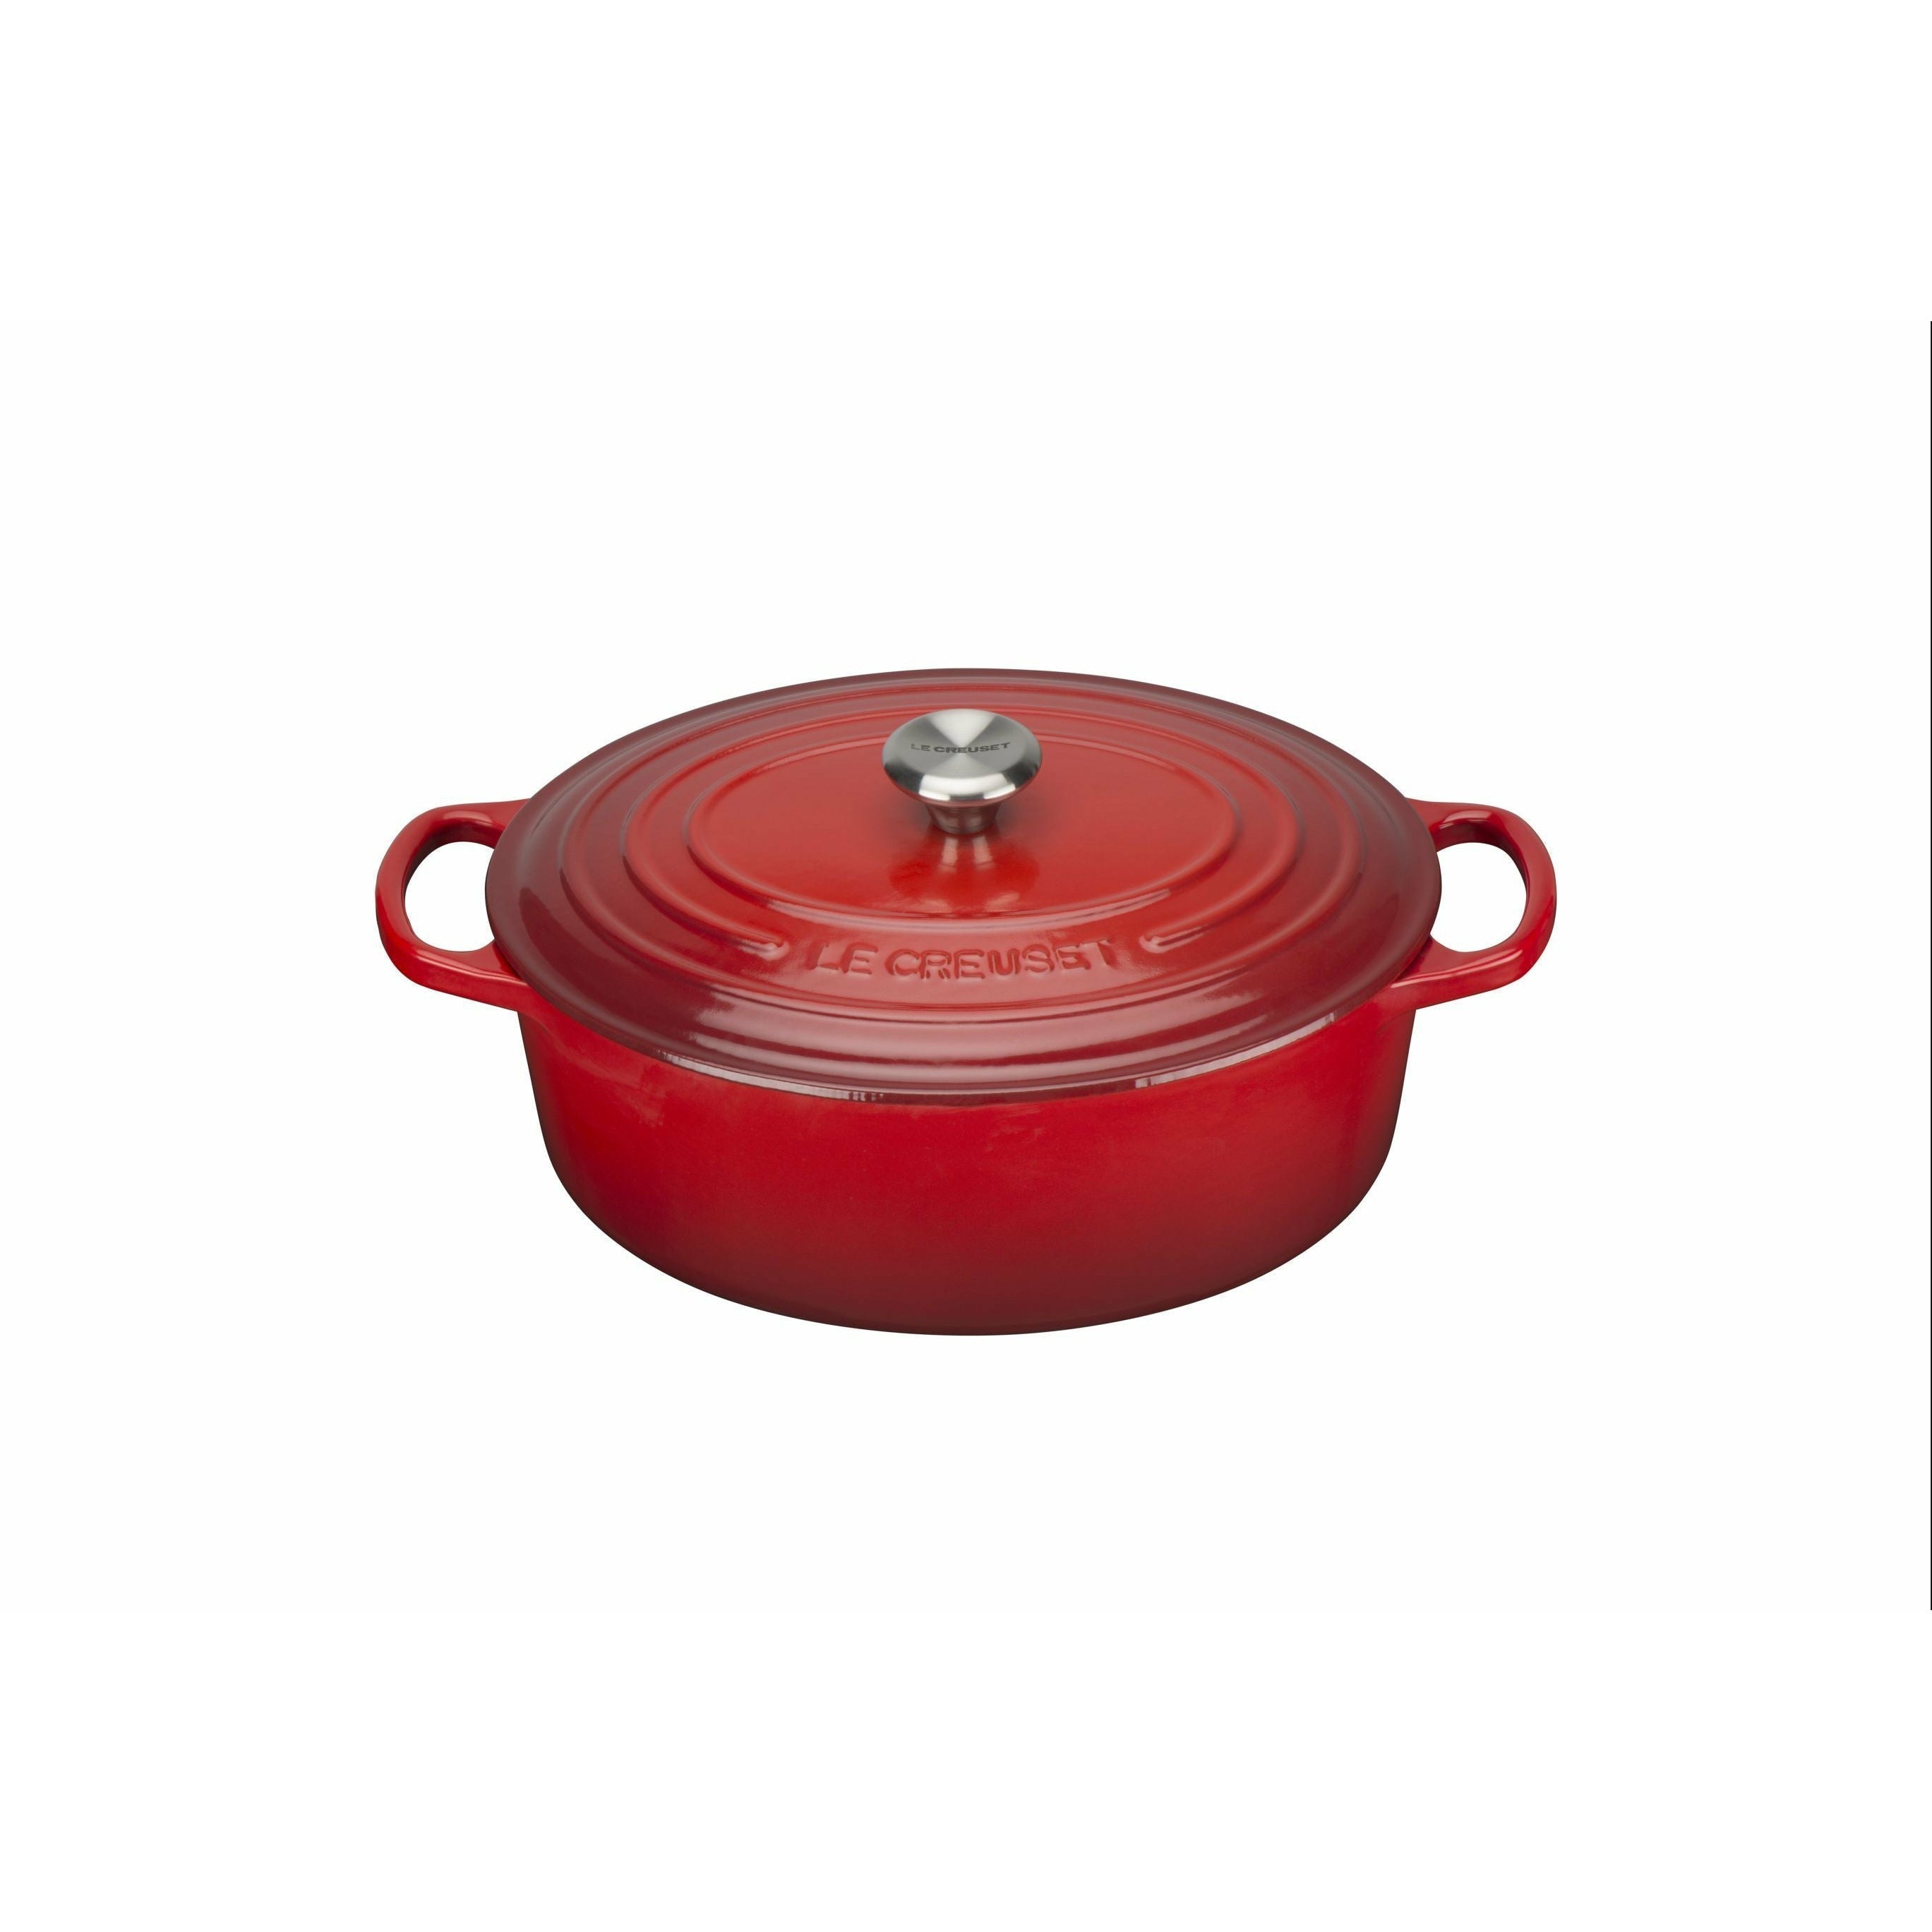 Le Creuset Signature Oval Roaster 27 cm, Cherry Red